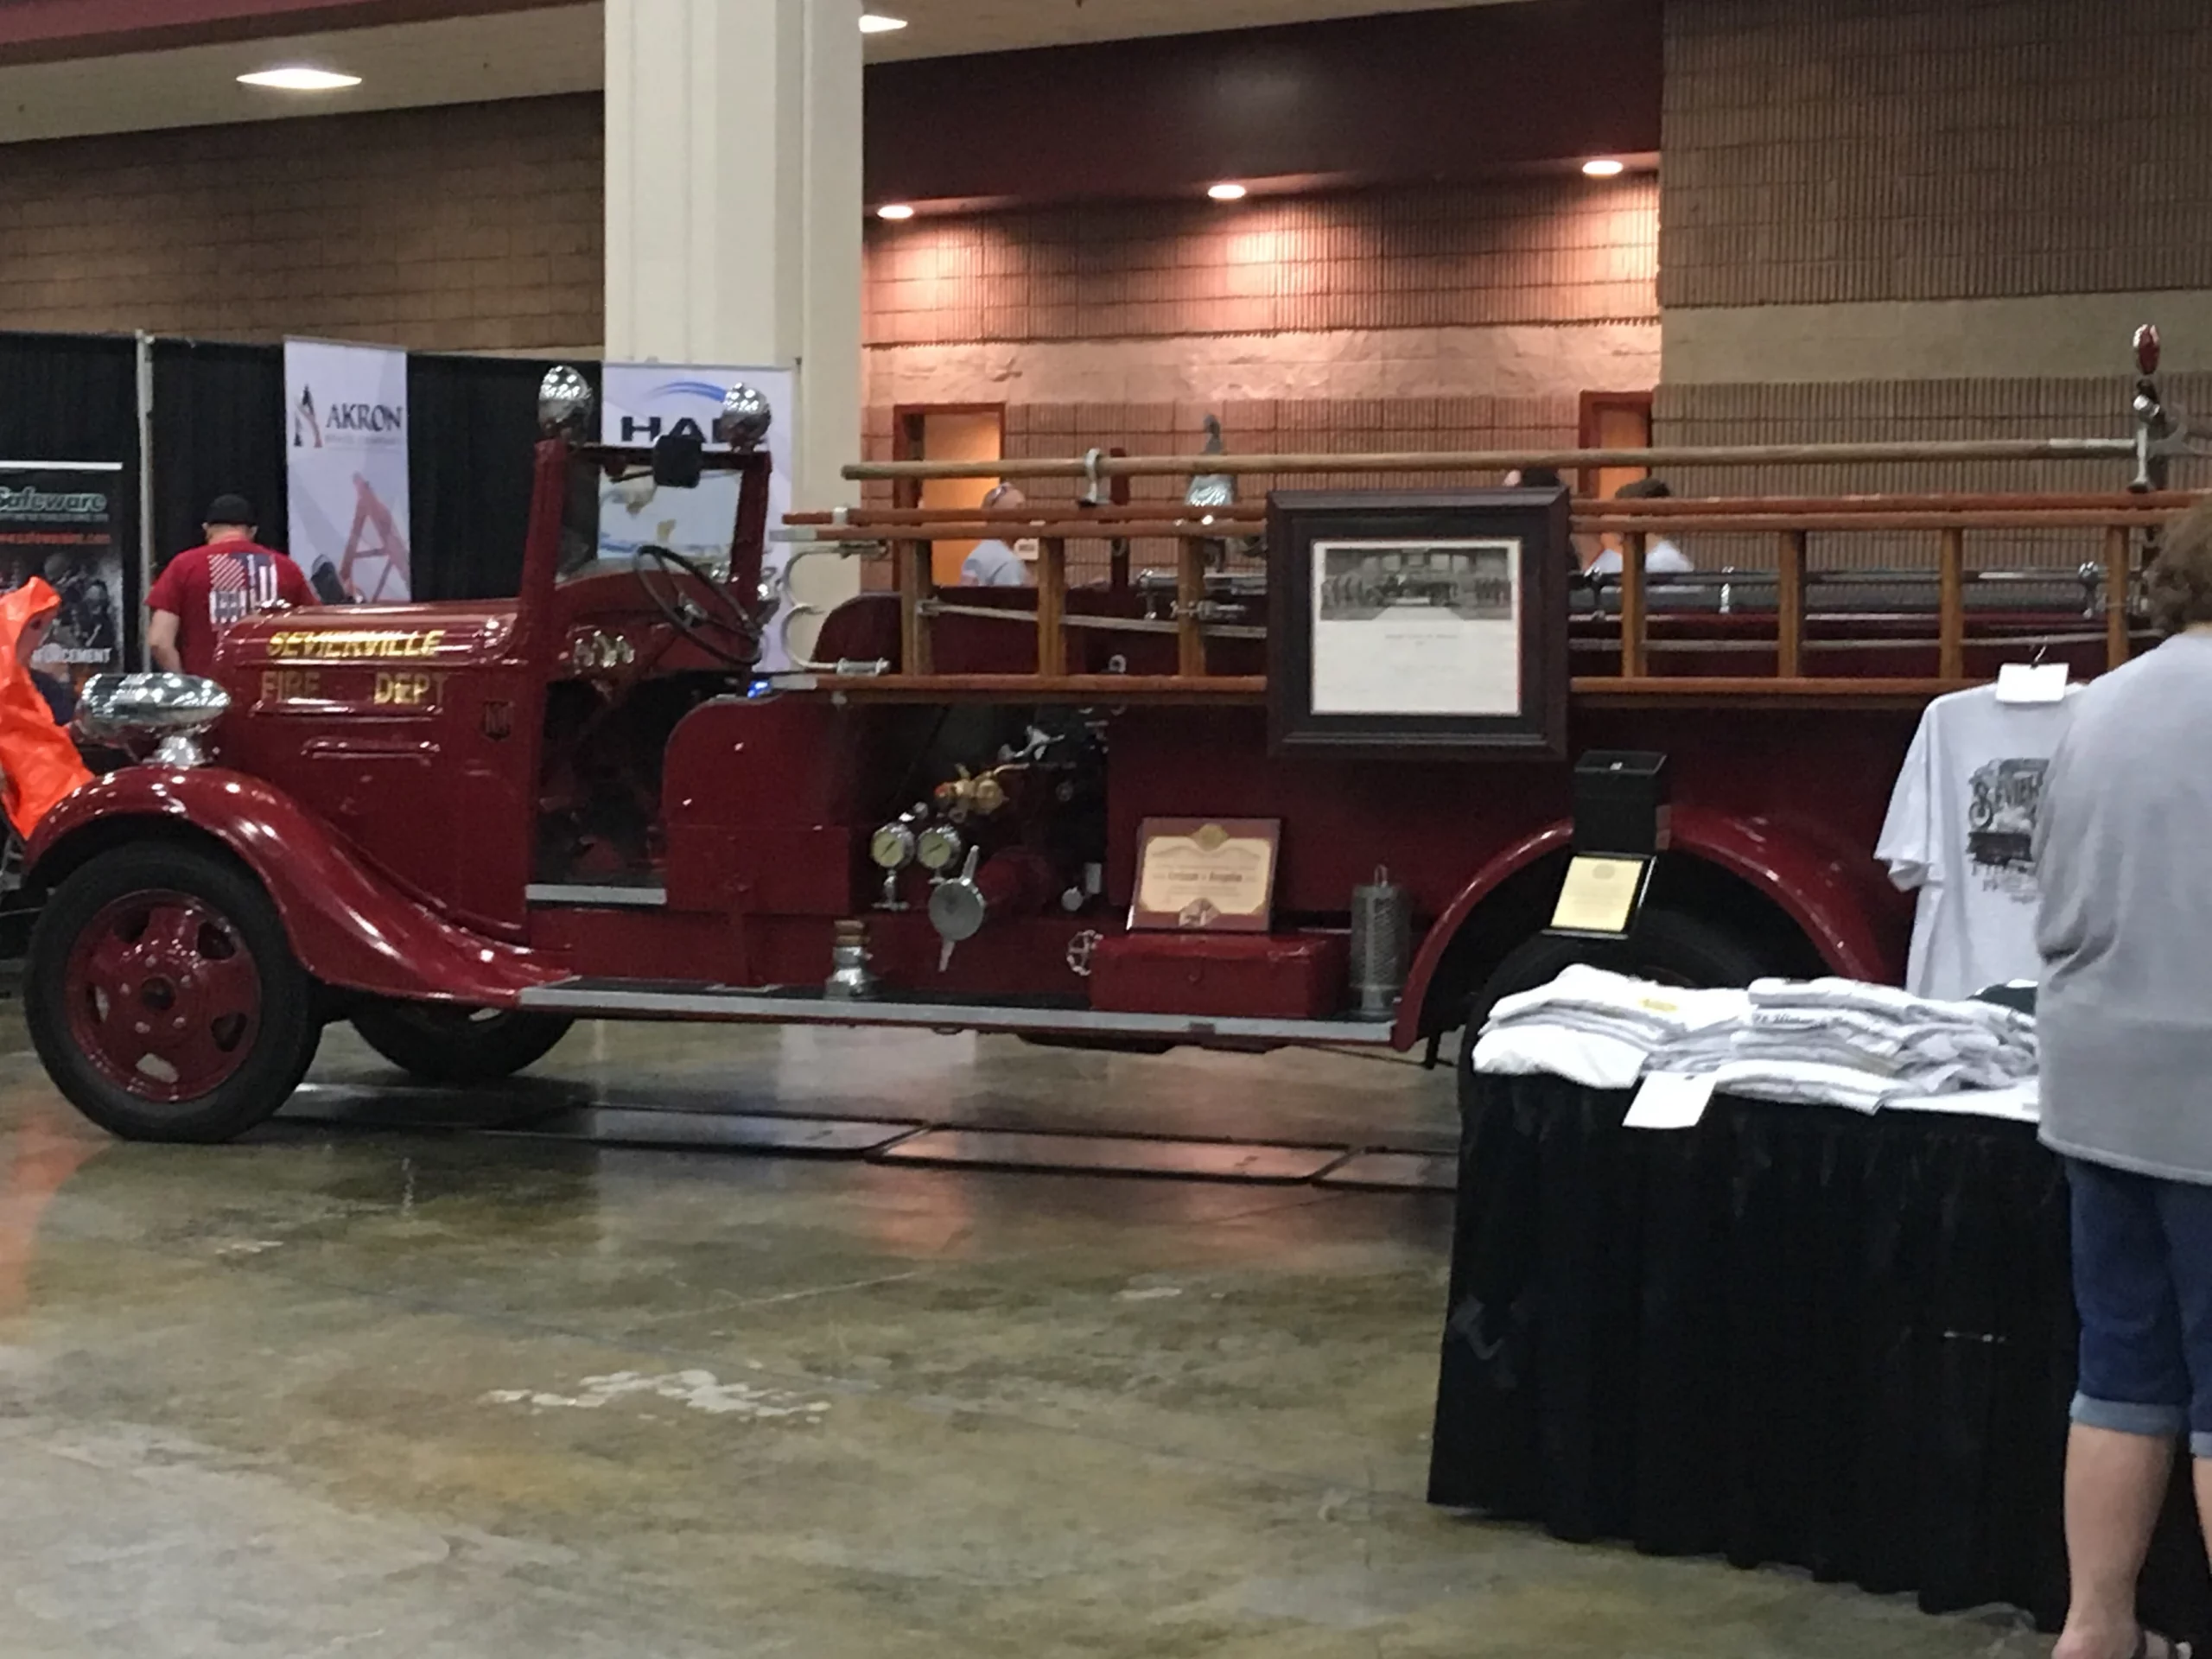 A vintage firetruck is on display at the Smoky Mountain Fire/Rescue Expo.